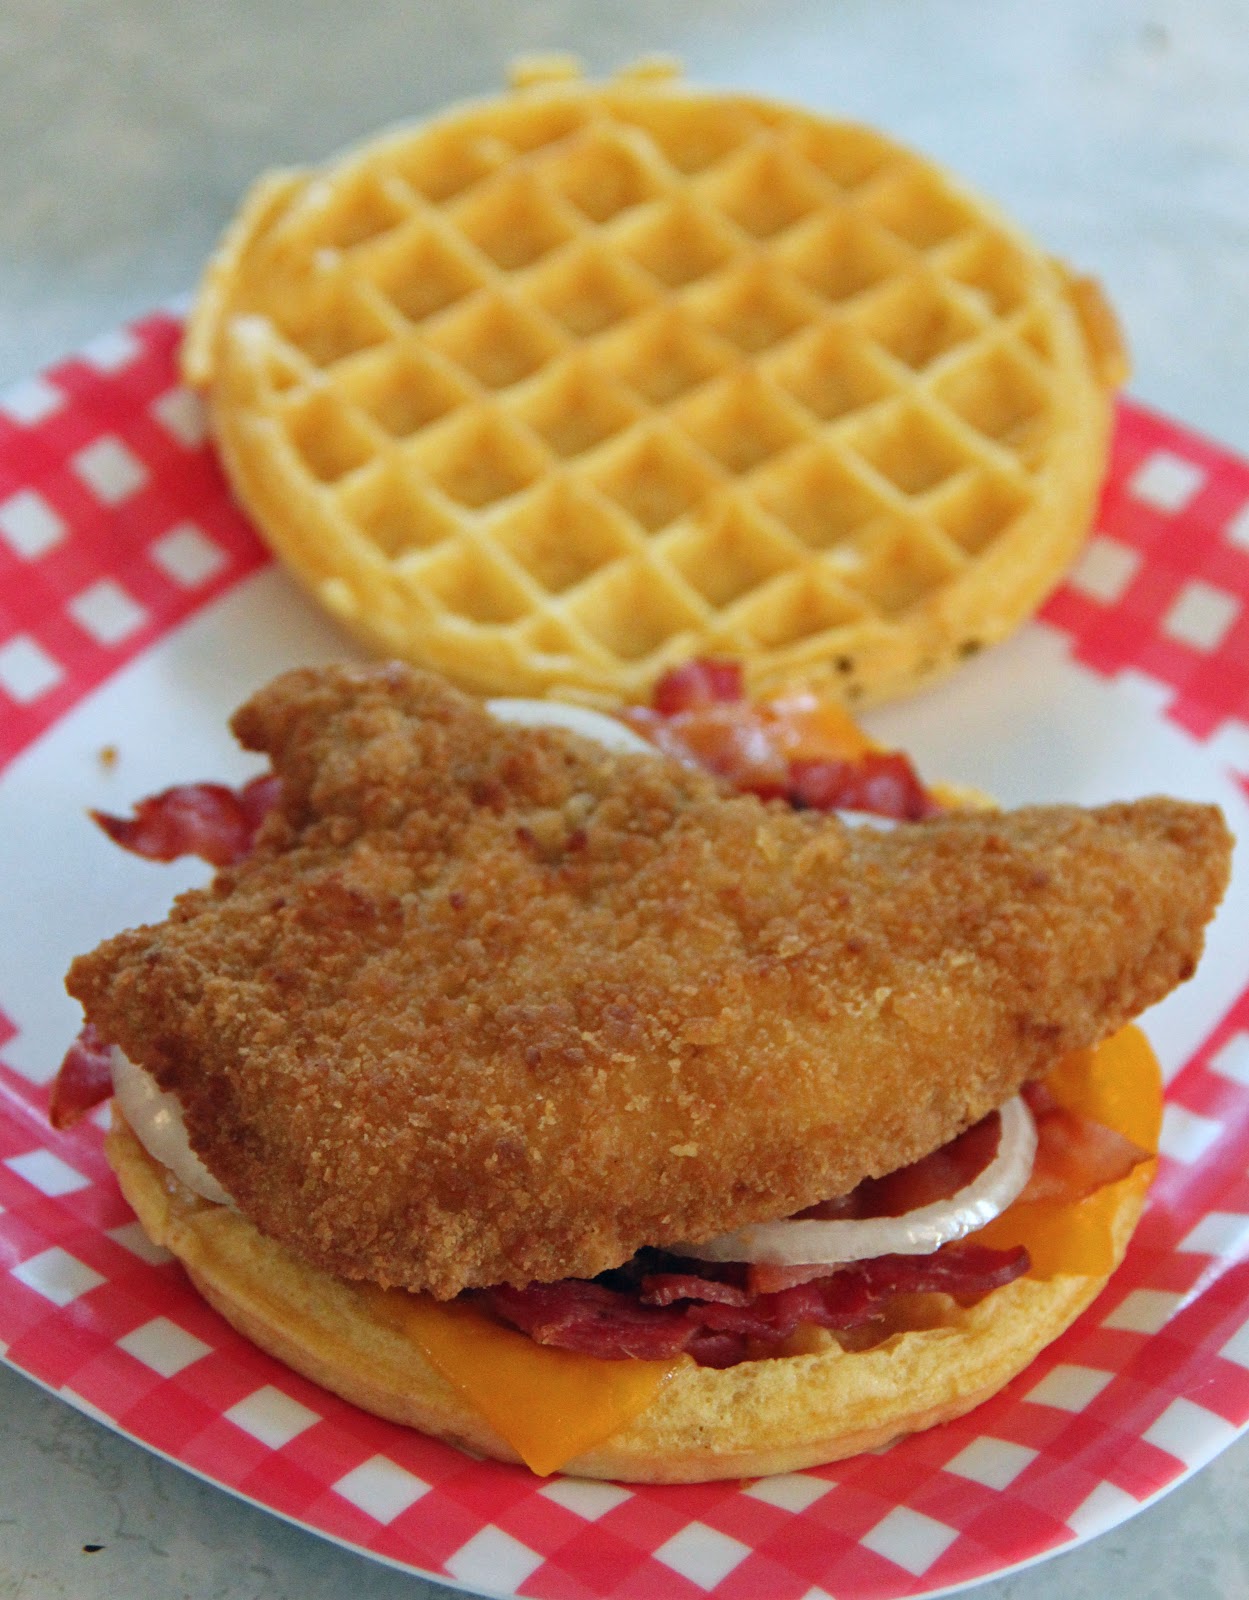 Jo and Sue: Easy Chicken and Waffle Sandwich